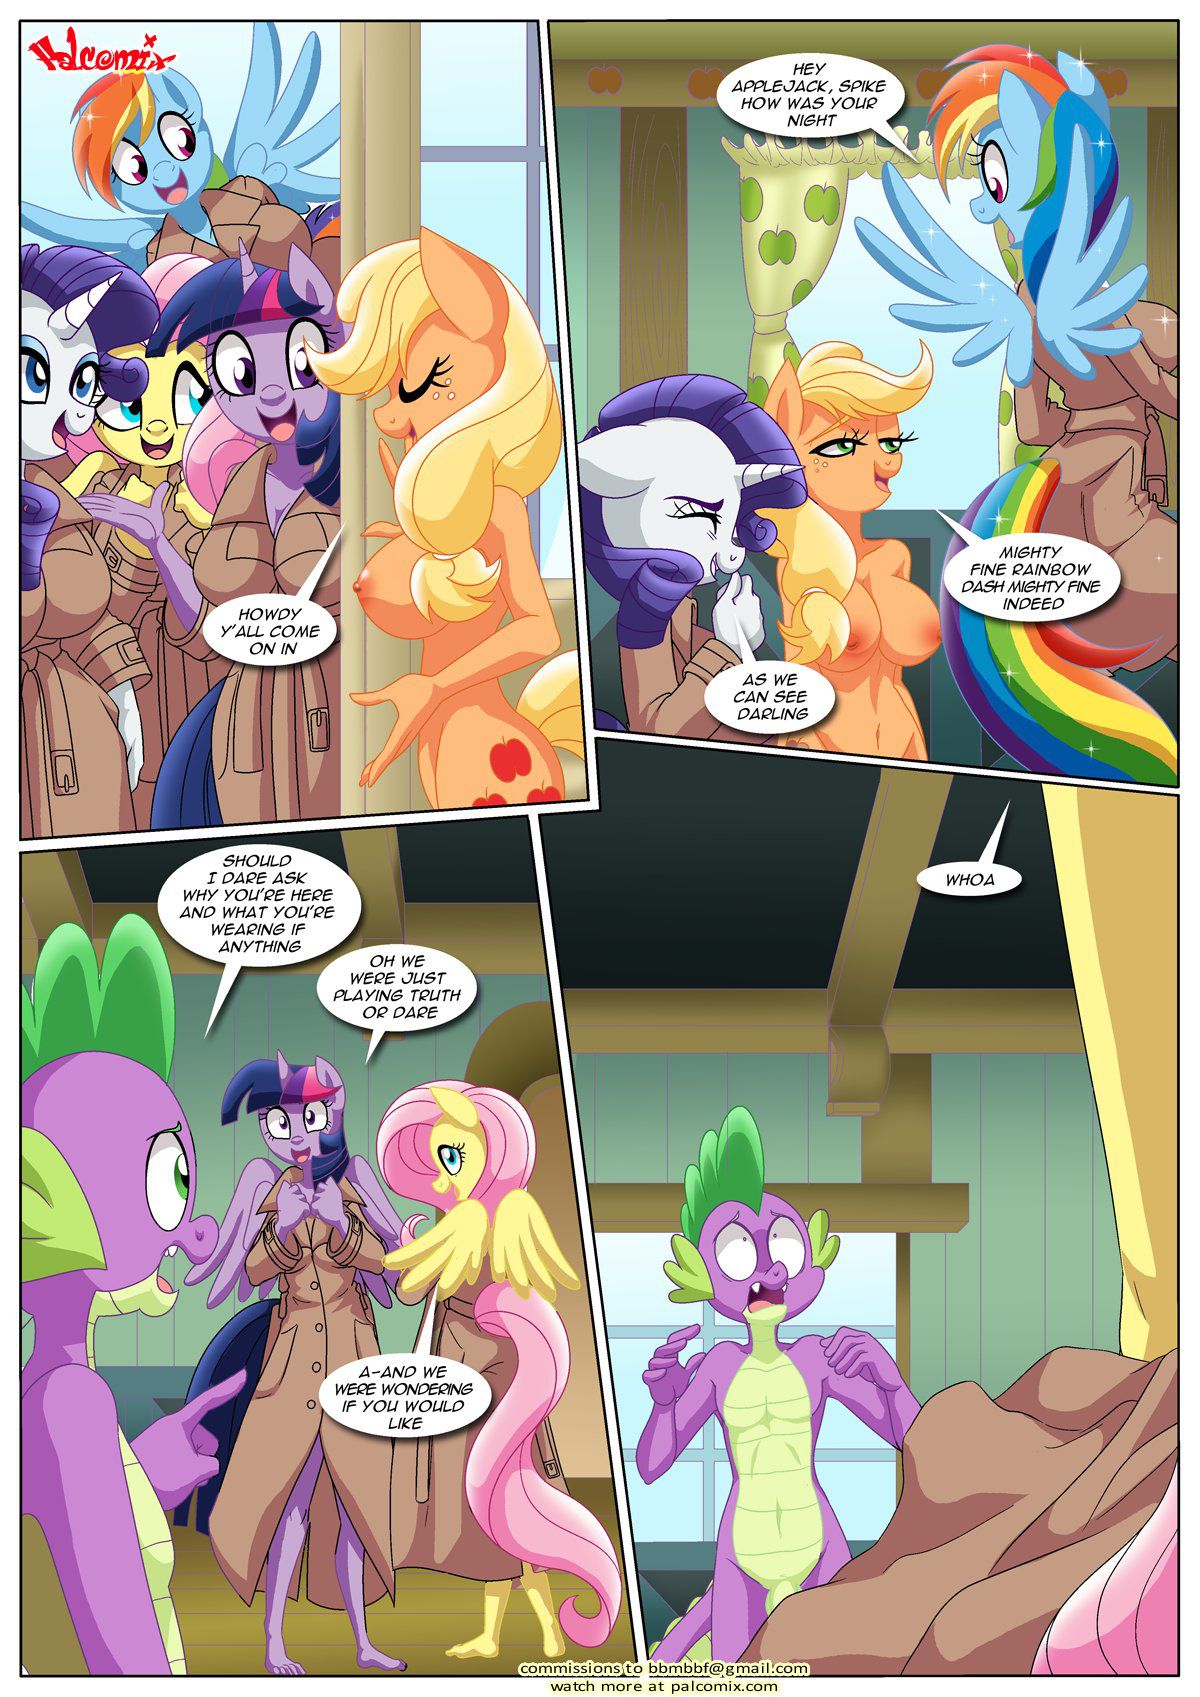 [Palcomix] Pinkie's Playhouse (My Little Pony Friendship Is Magic) [Ongoing] 9